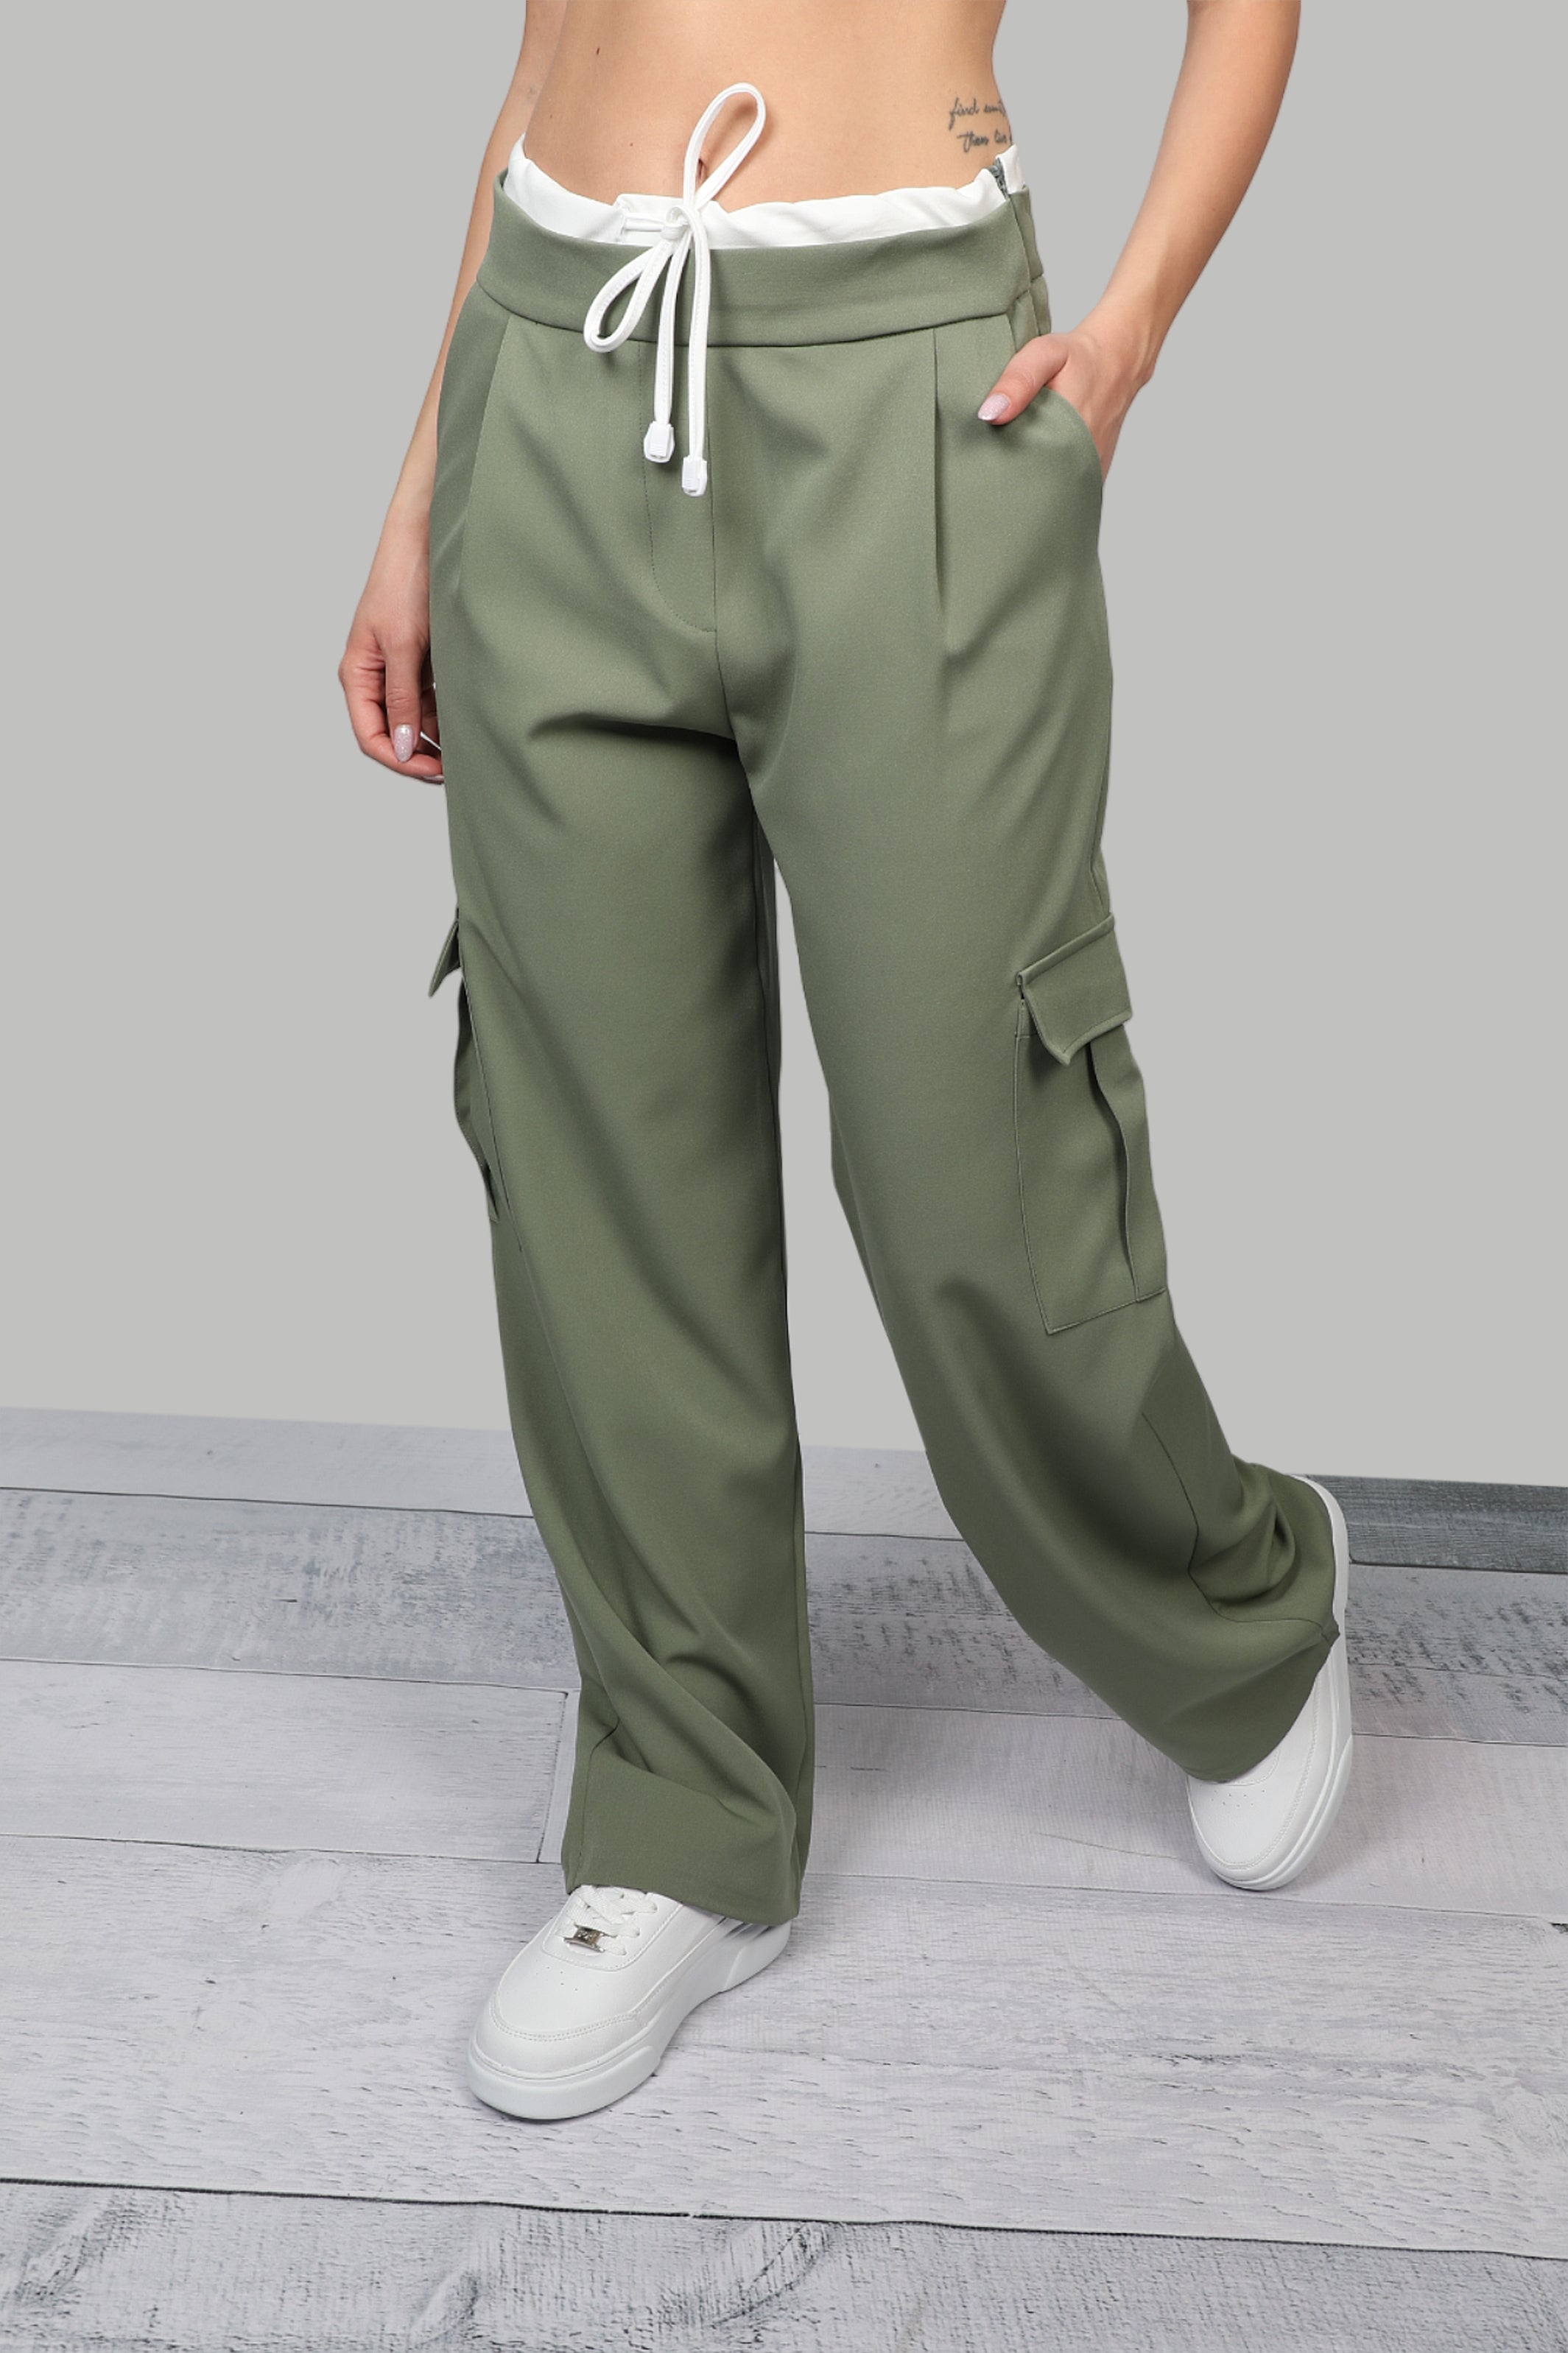 Sport Chic Cargo Olive Pants With Elastic Waist